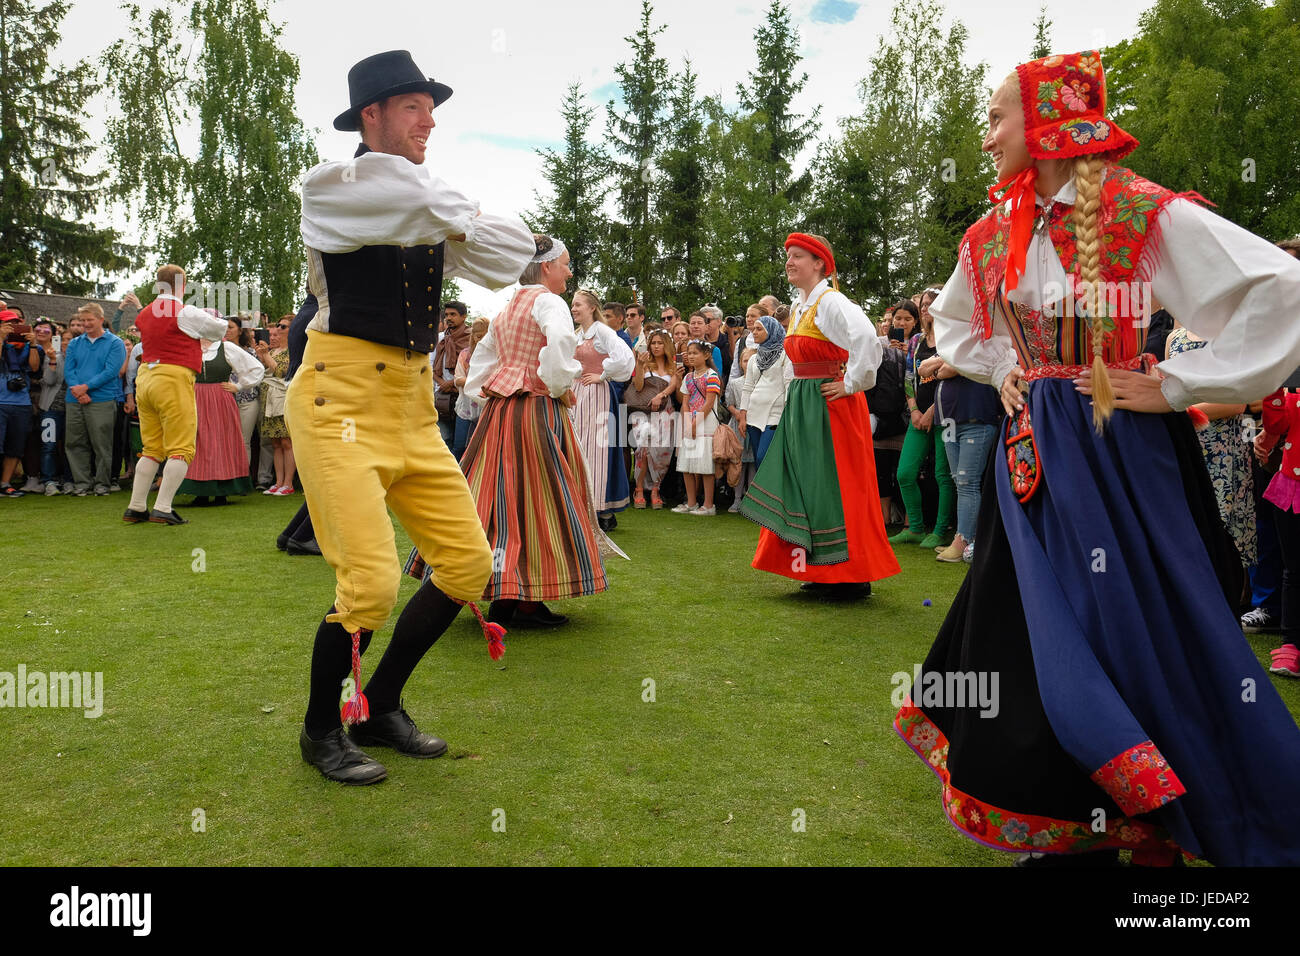 Stockholm Sweden 23rd June 2017 People Wearing Traditional Swedish Costumes Dance To